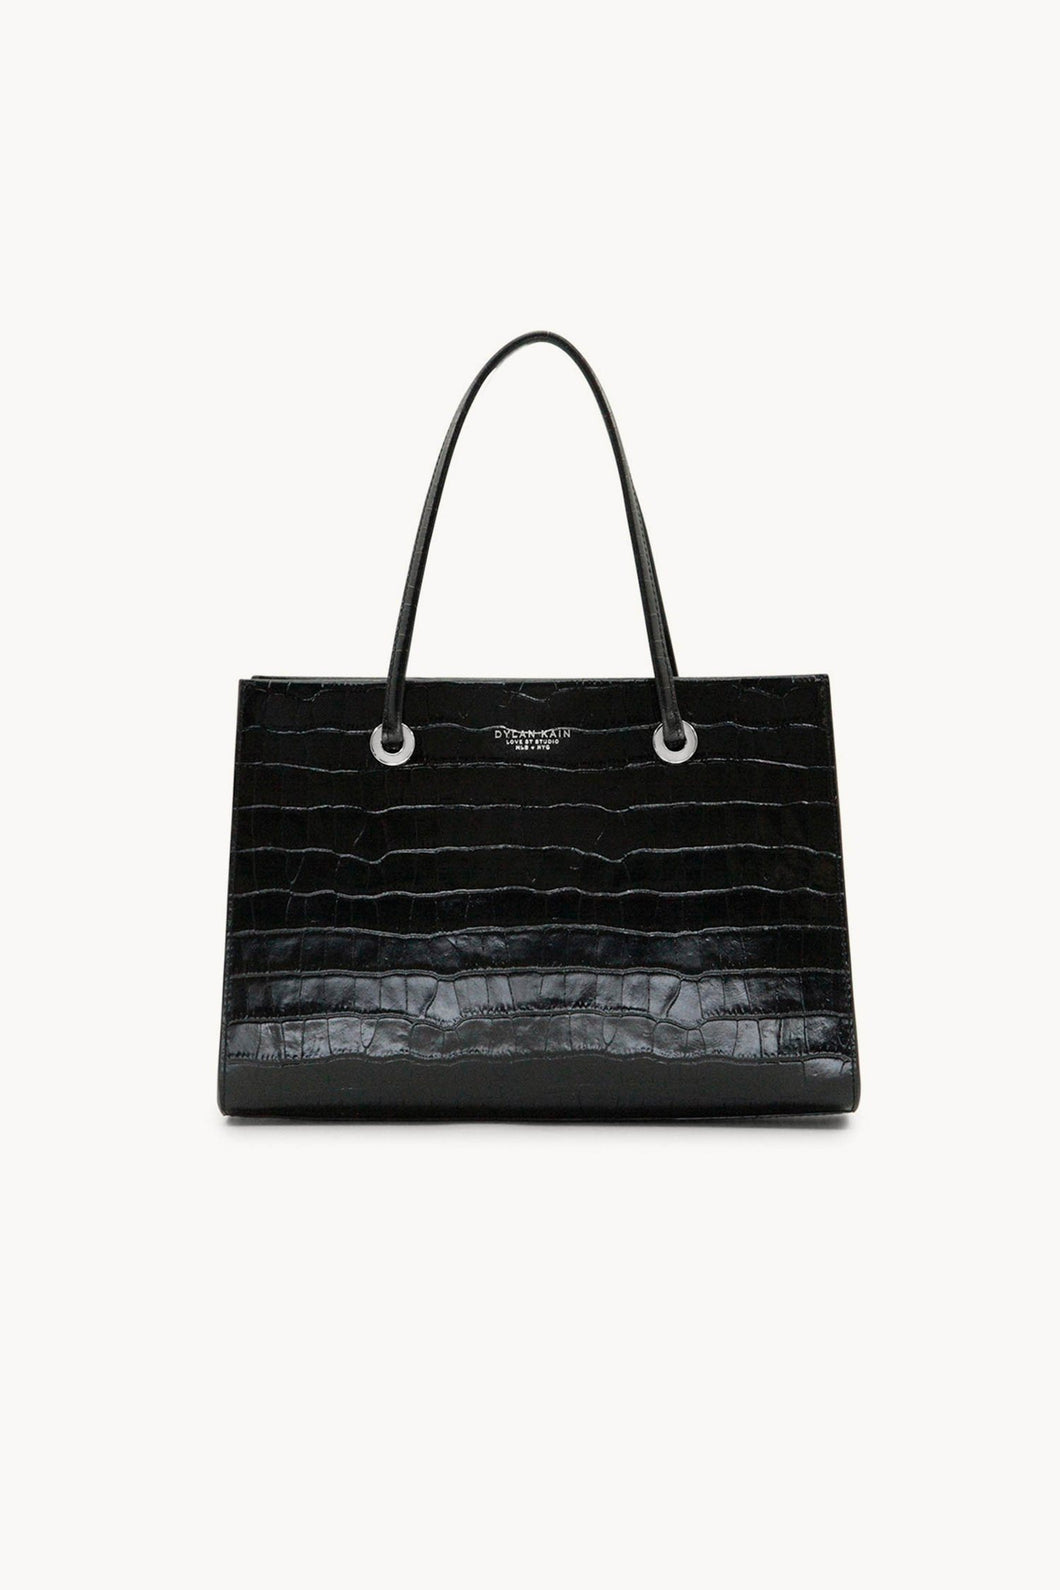 Dylan Kain - The Lydiana Bag Silver